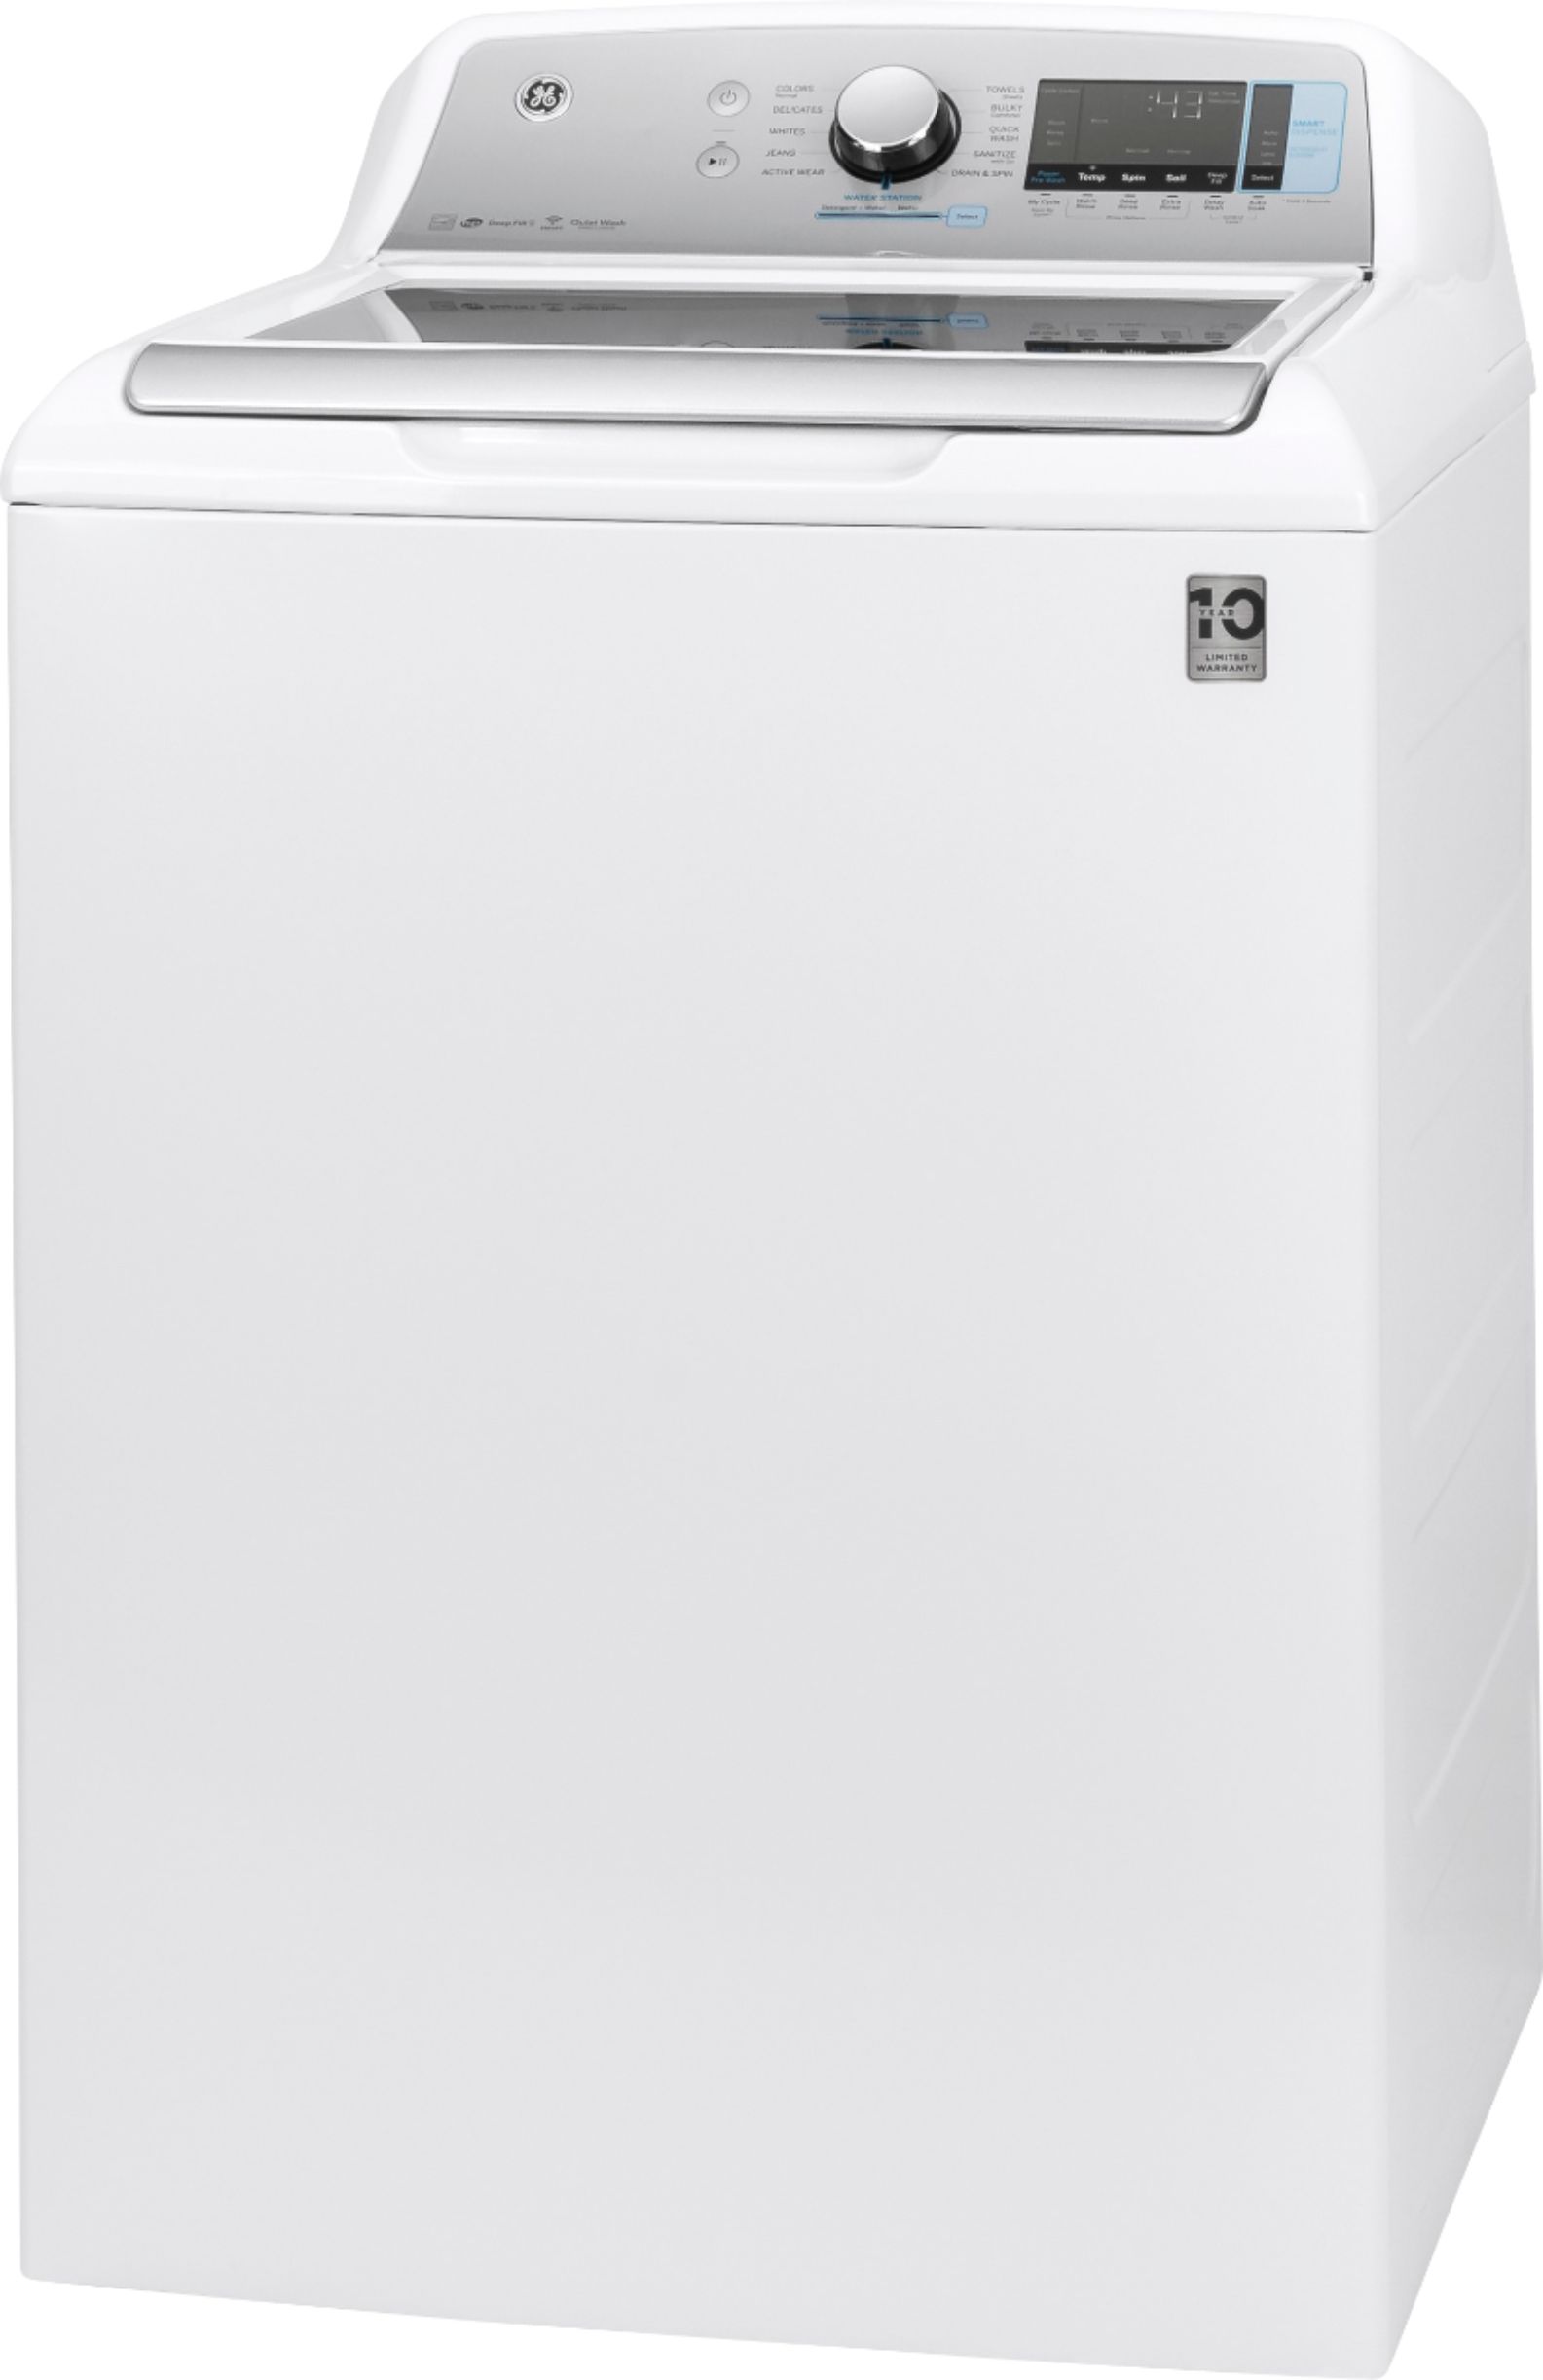 Left View: GE - 5.2 Cu. Ft. High-Efficiency Top Load Washer - White on White/Silver Backsplash